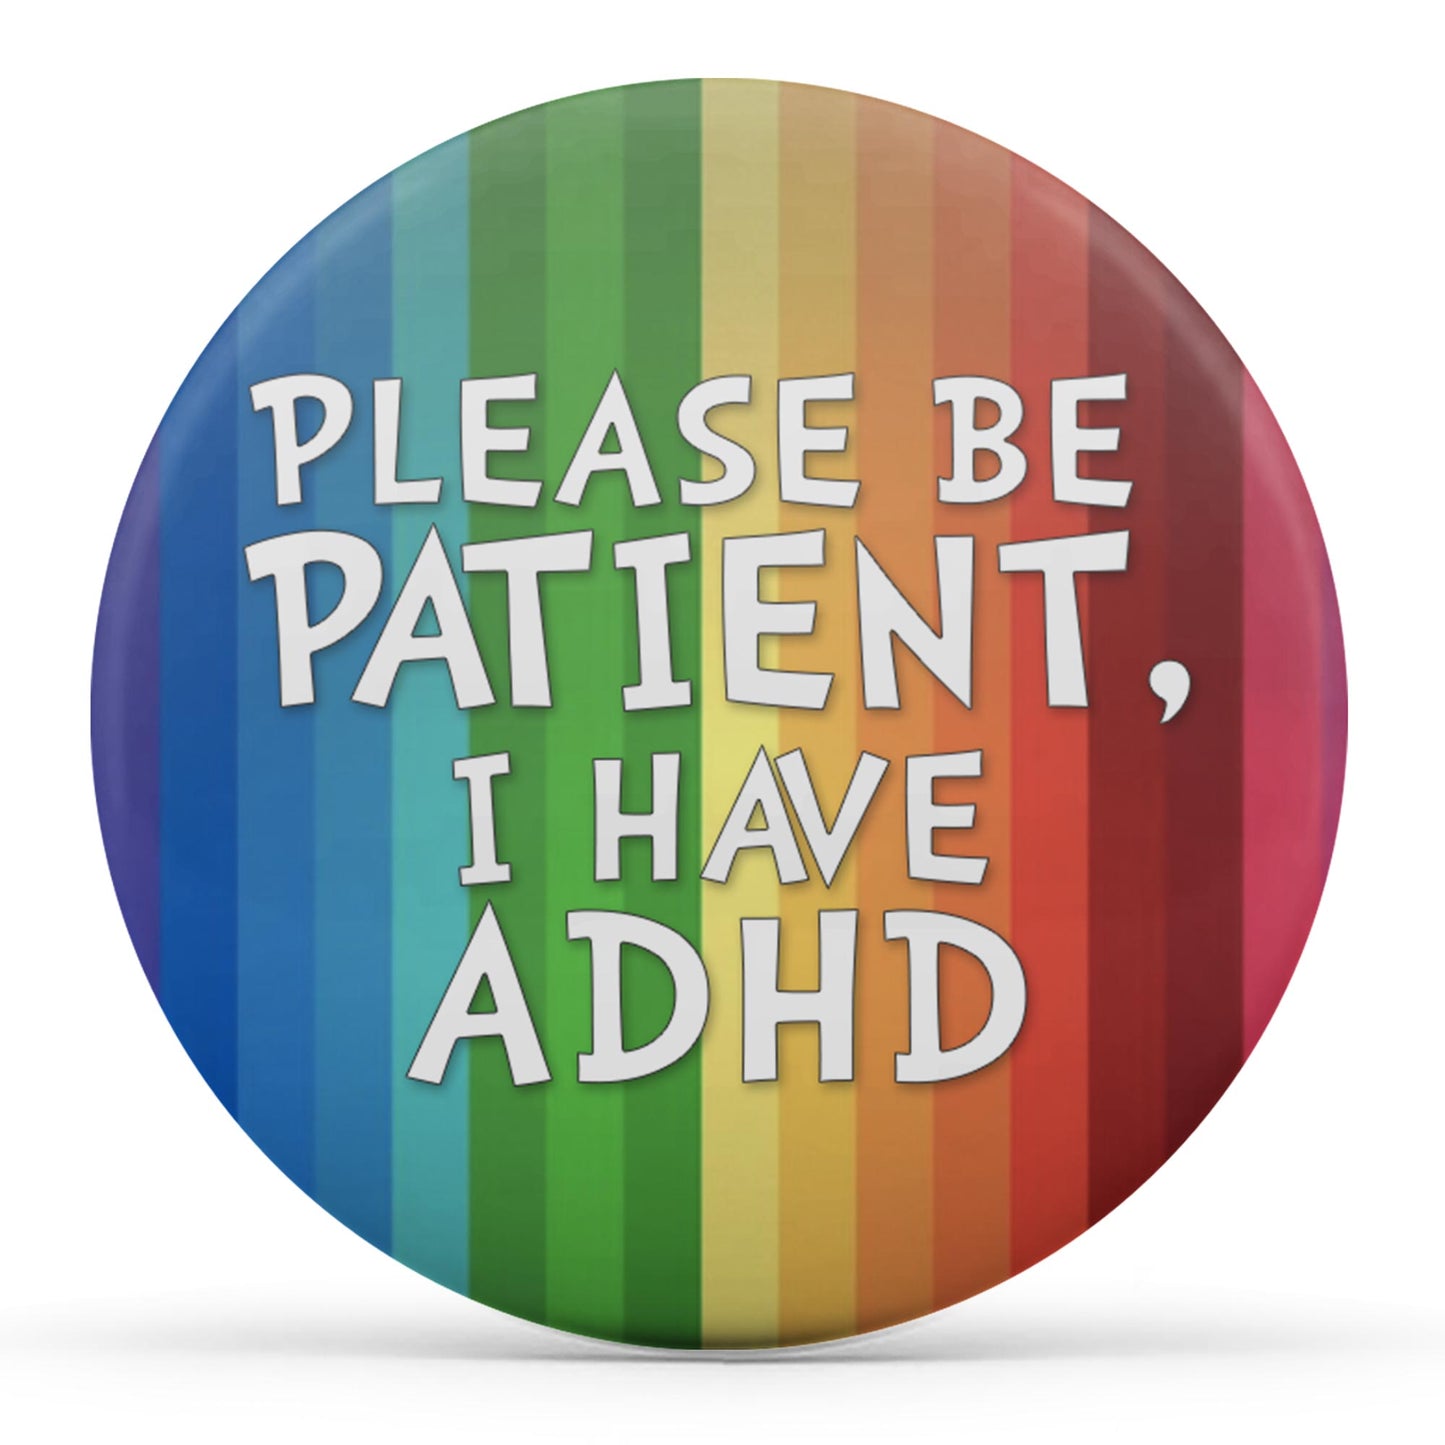 Please Be Patient, I Have ADHD